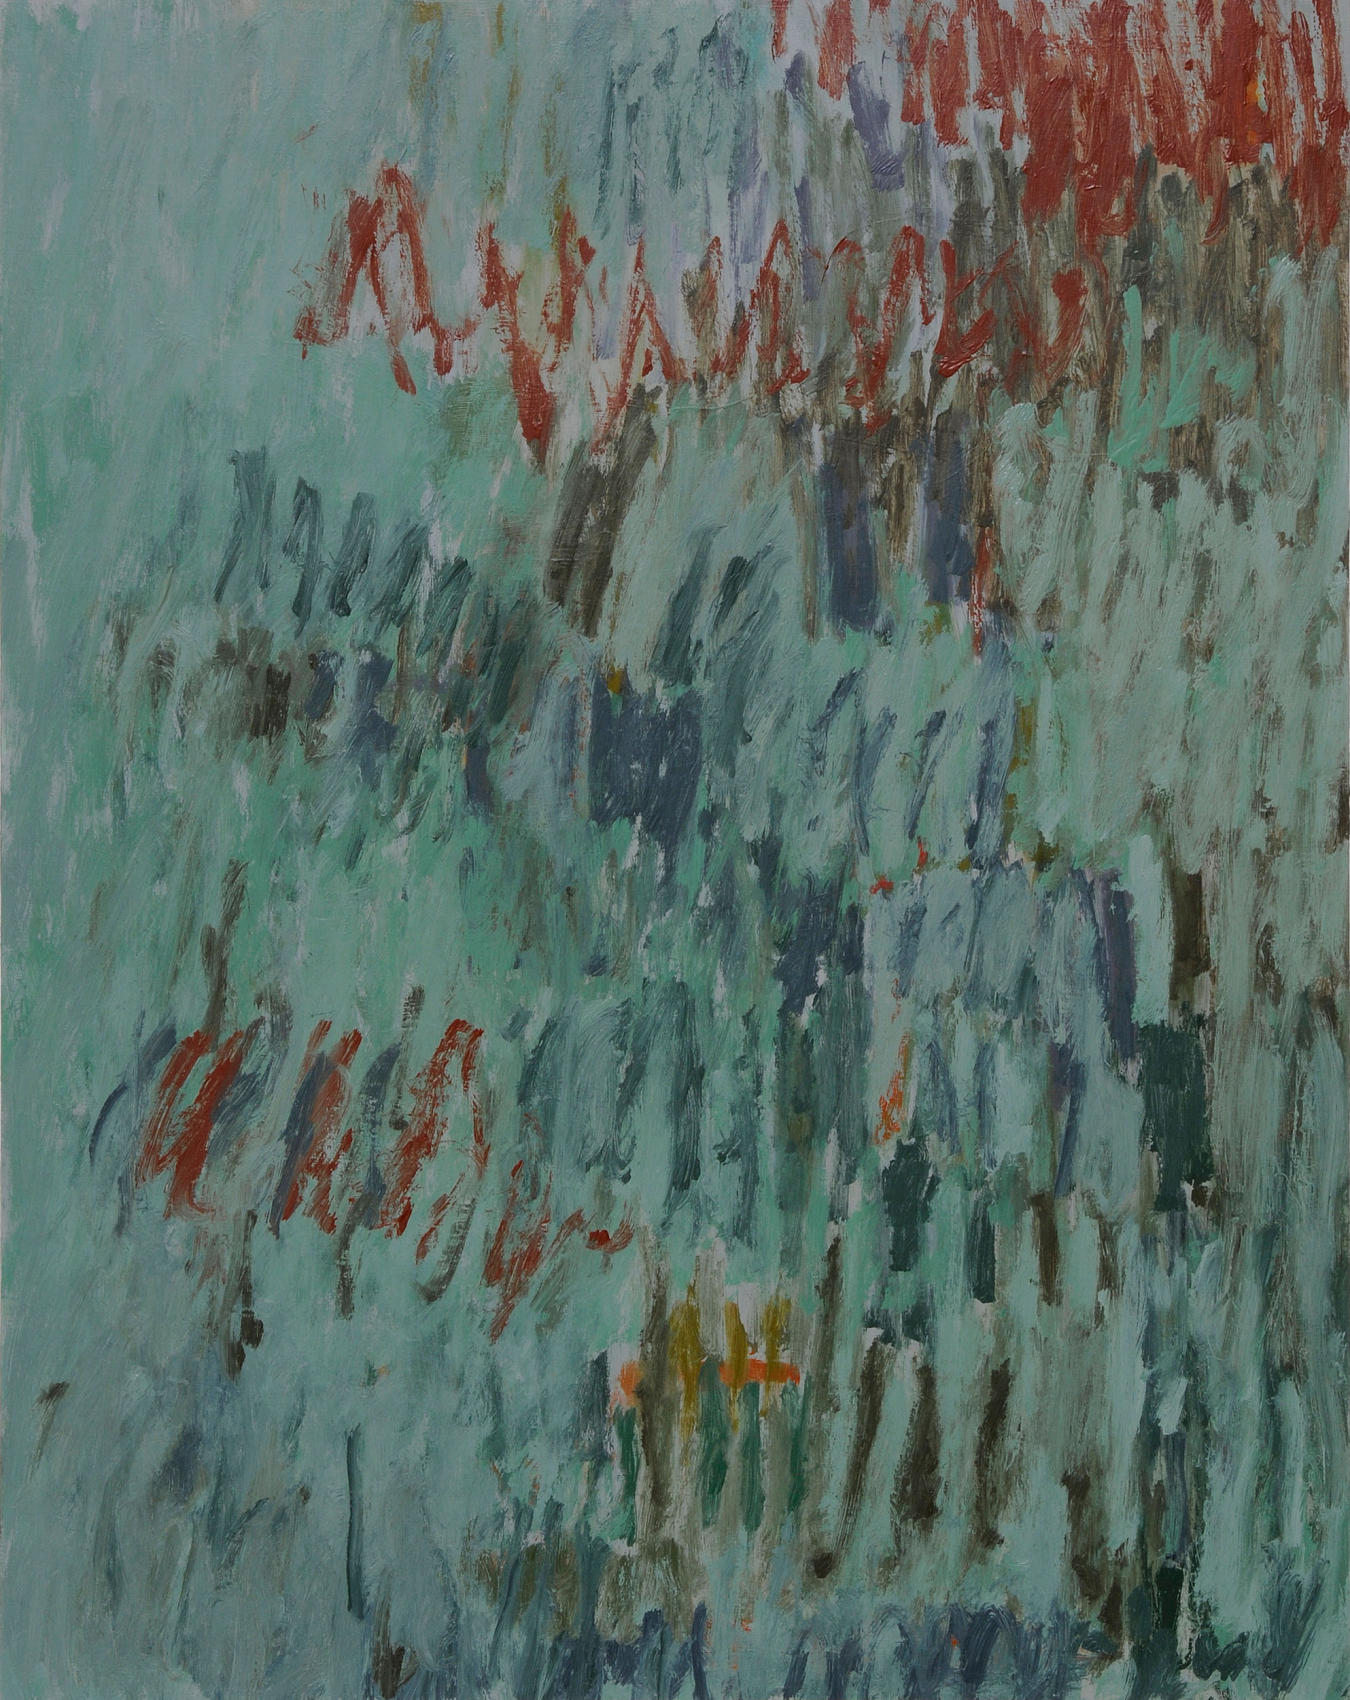 Untitled, oil on wood, 30 x 24 inches, 2007